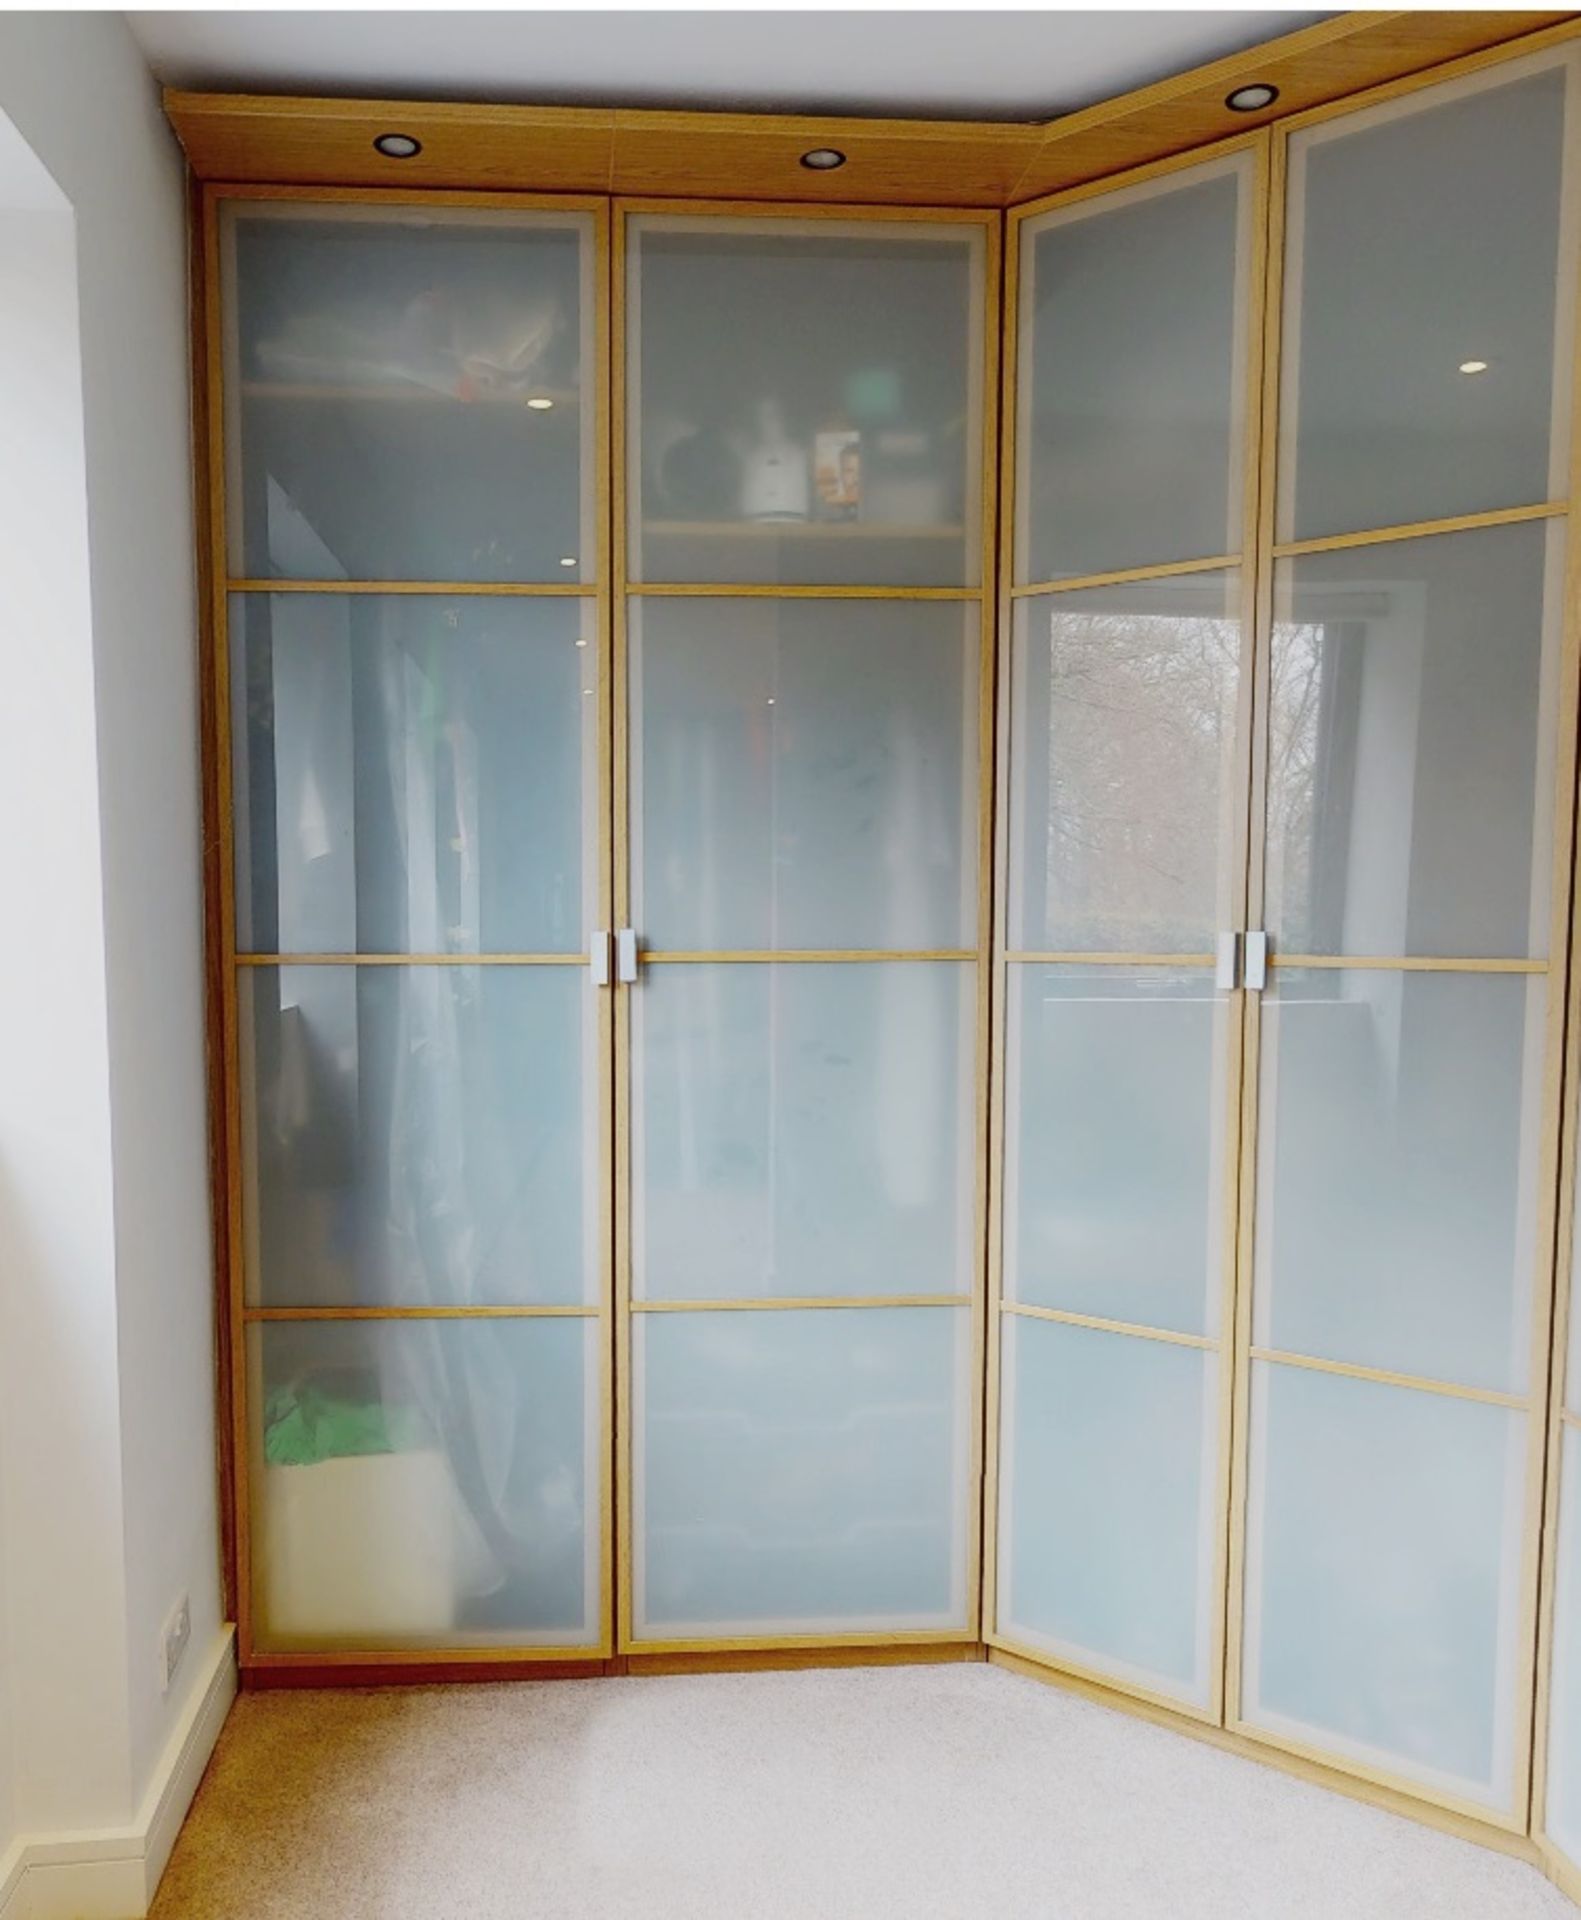 Large Bank Of Bespoke Fitted Master Bedroom Wardrobe Storage With Frosted Glass 8-Door Frontage - - Image 4 of 8